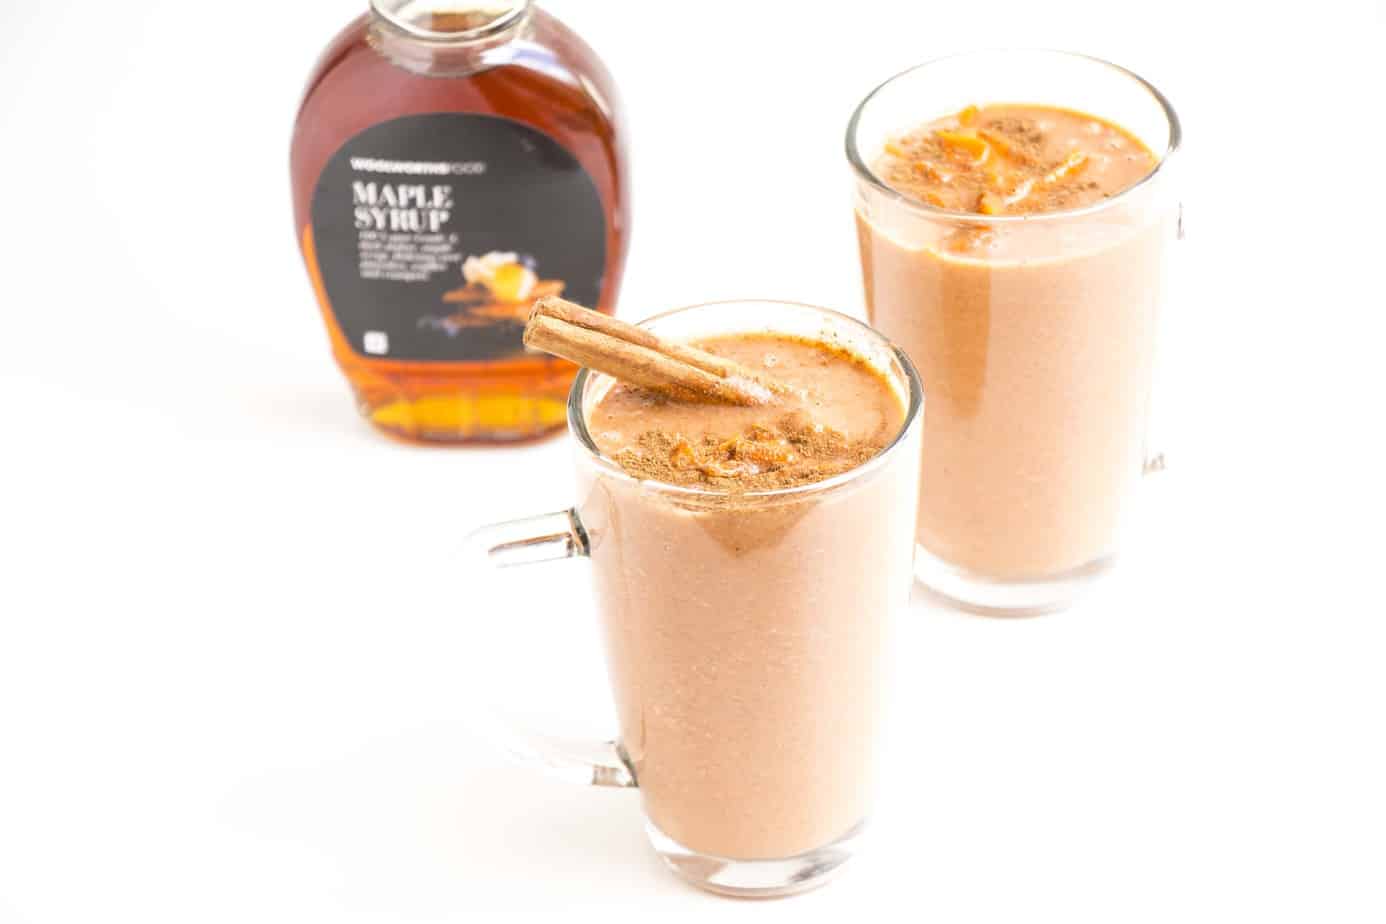 Two carrot banana smoothies in serving glasses garnished with cinnamon quills.